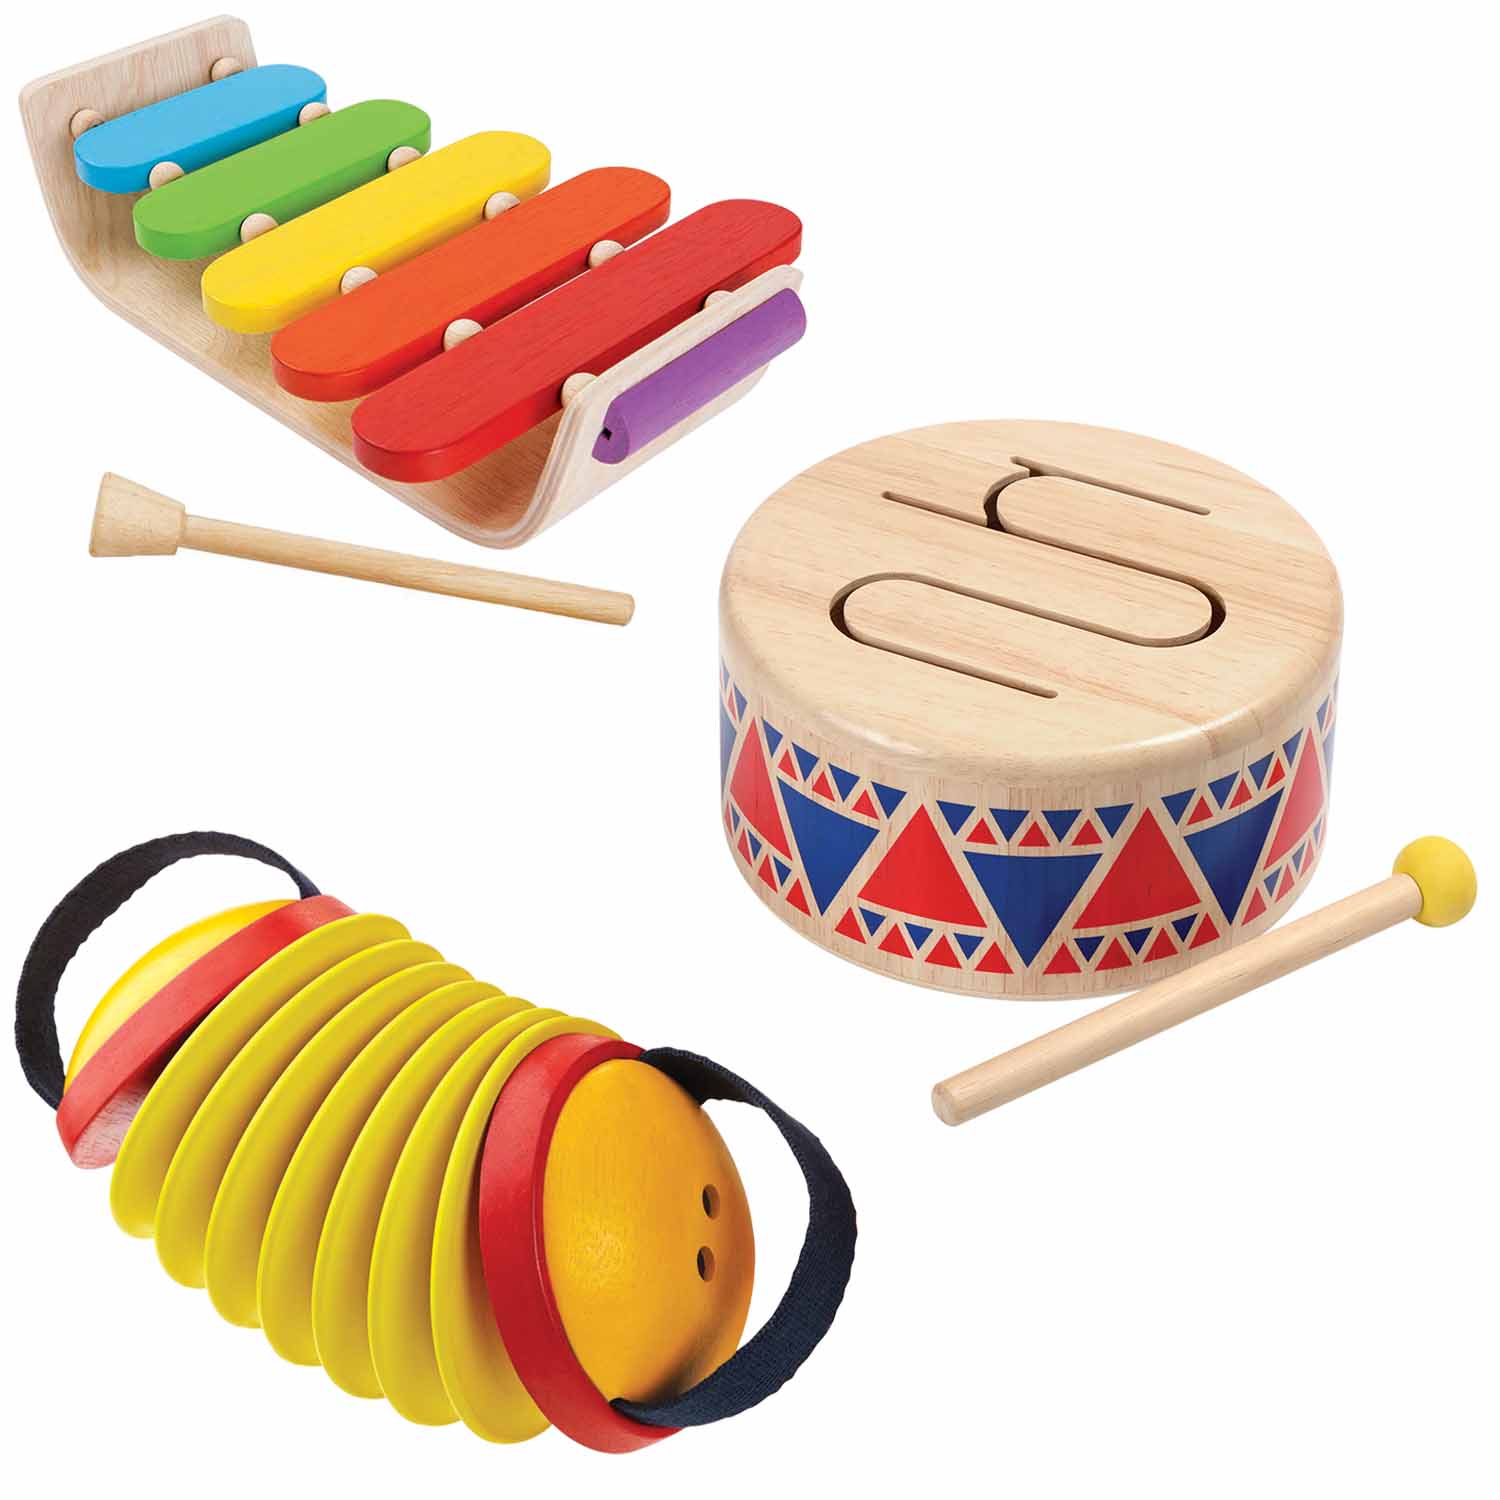 Wooden toy 5 piece instrument set brand new & sealed age 3+